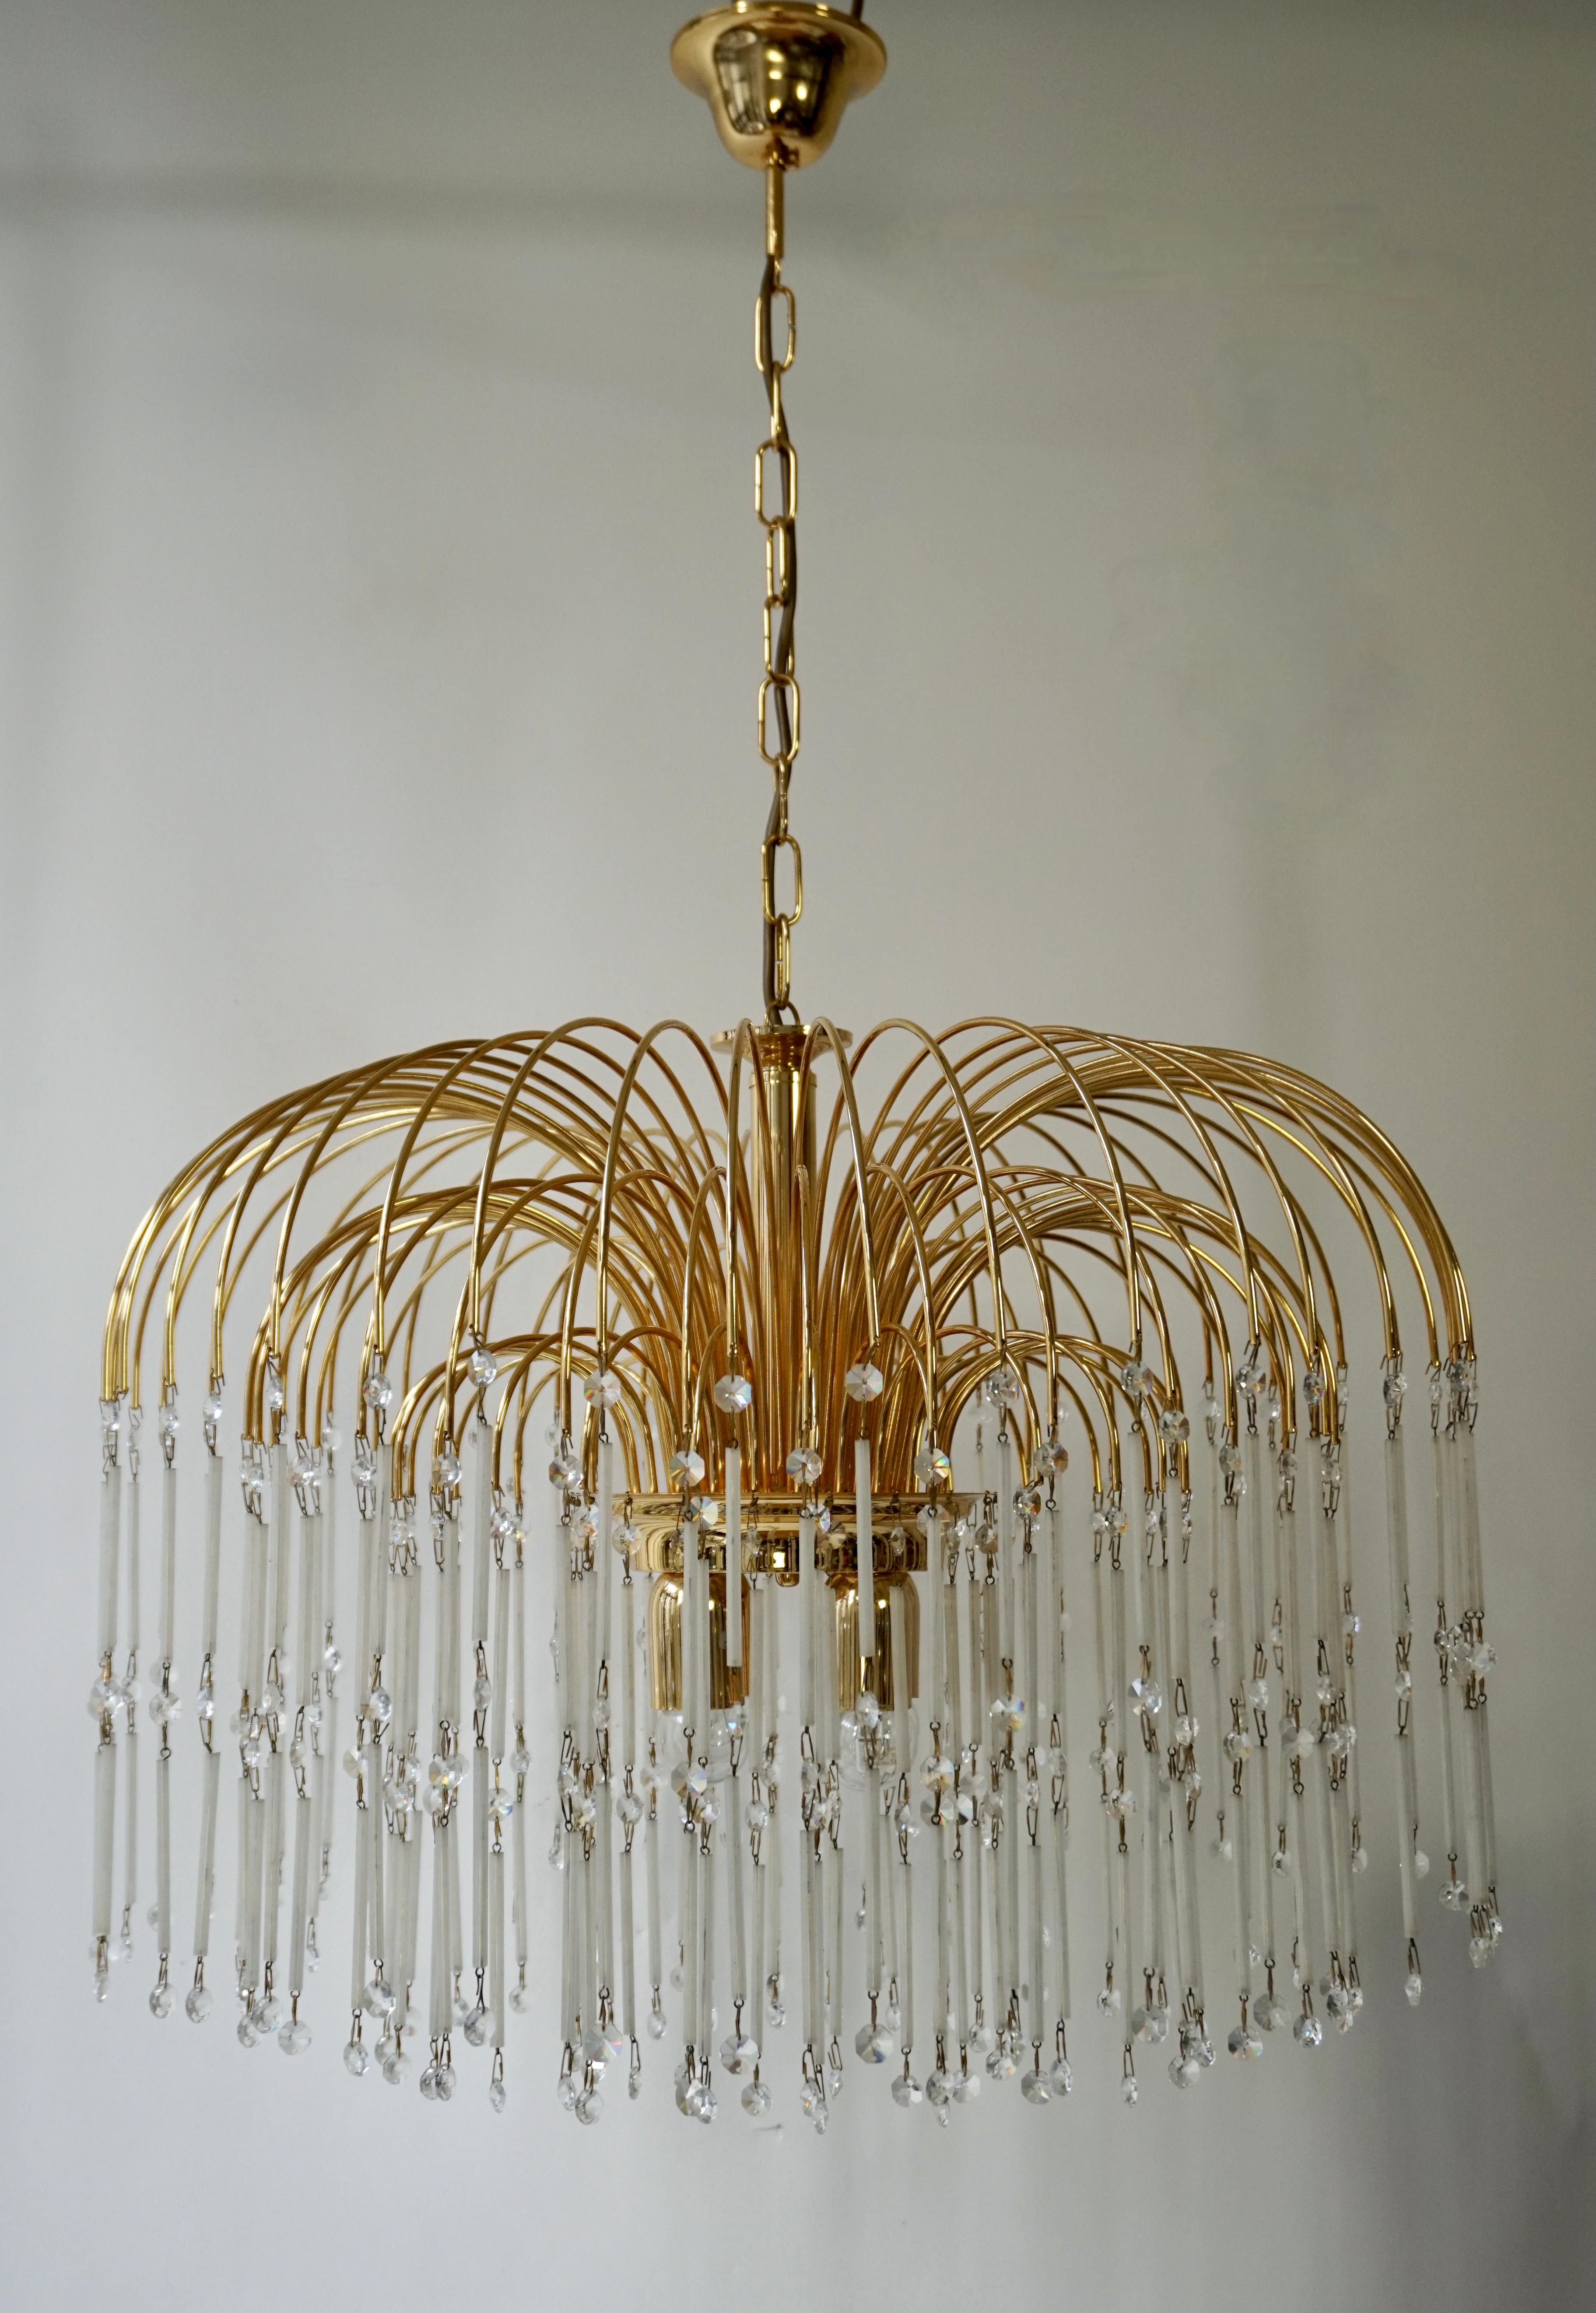 Mid-Century Modern waterfall chandelier with spectacular cut crystals throughout. Features a brass frame with multiple cascading tiers, fitted with of suspended glass tubes and crystal beads. The frame is comprised of three-tier in varying diameters